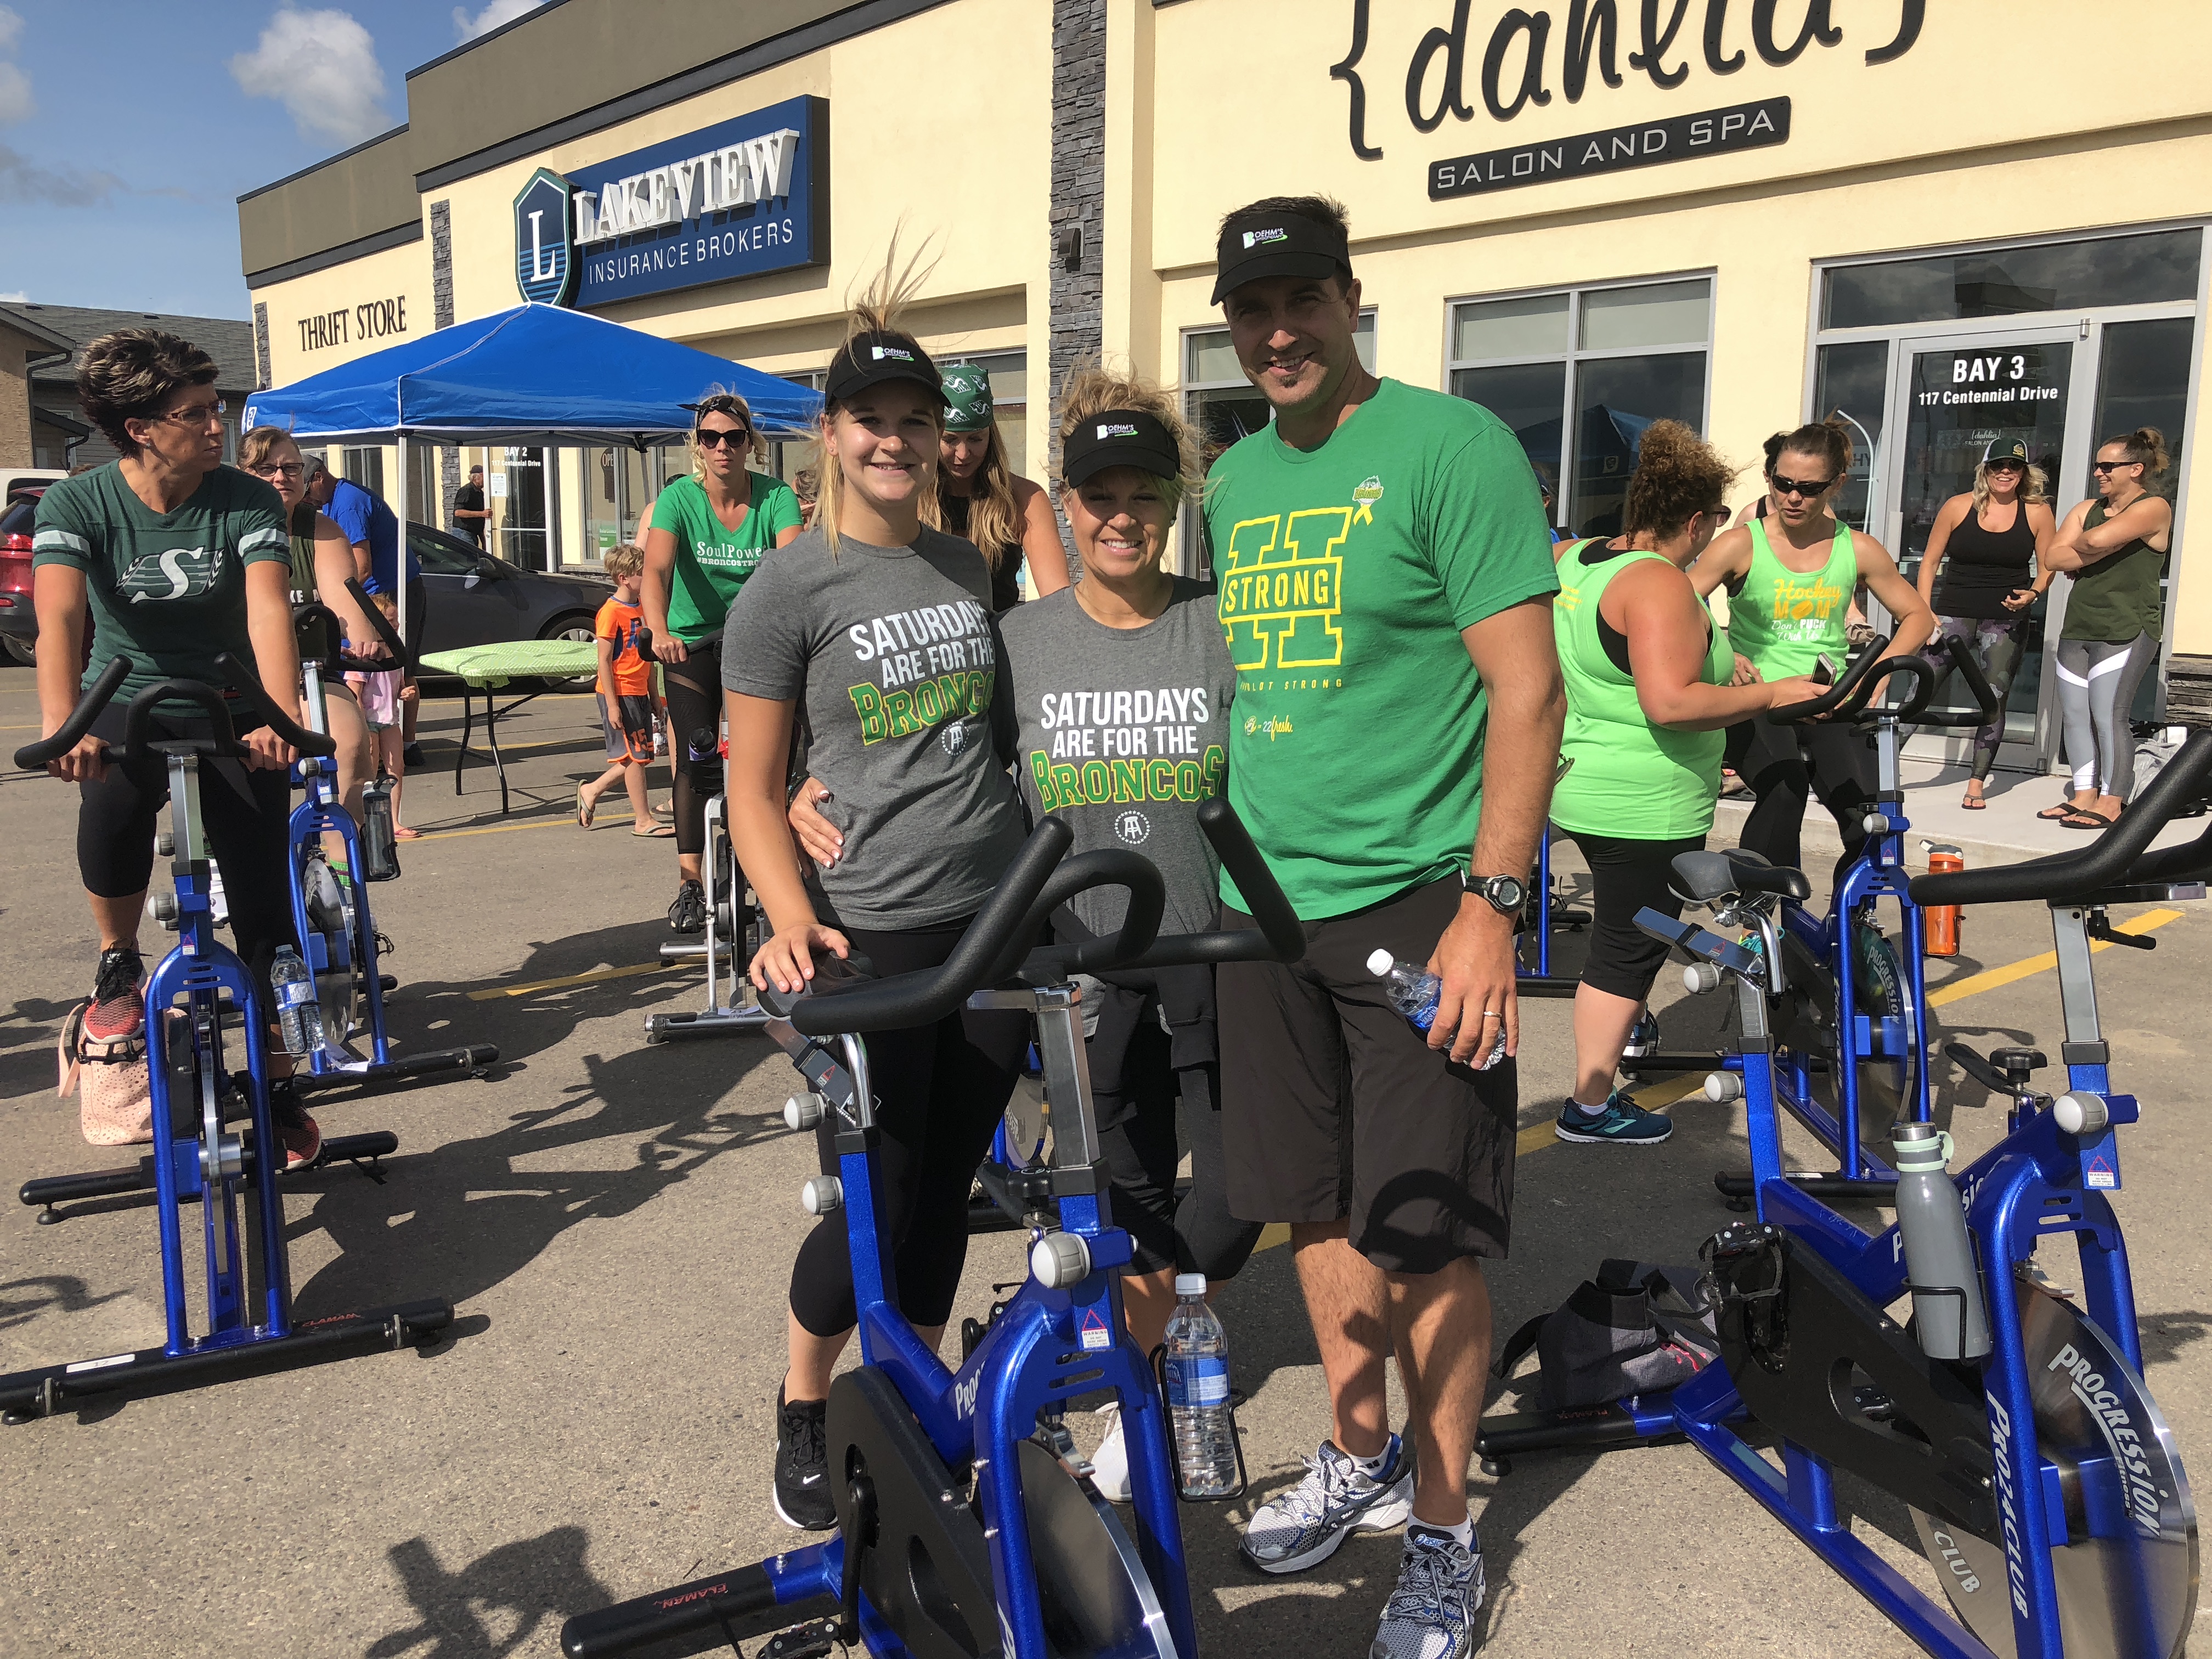 Boehm's Physiotherapy Staff Biking for Charity